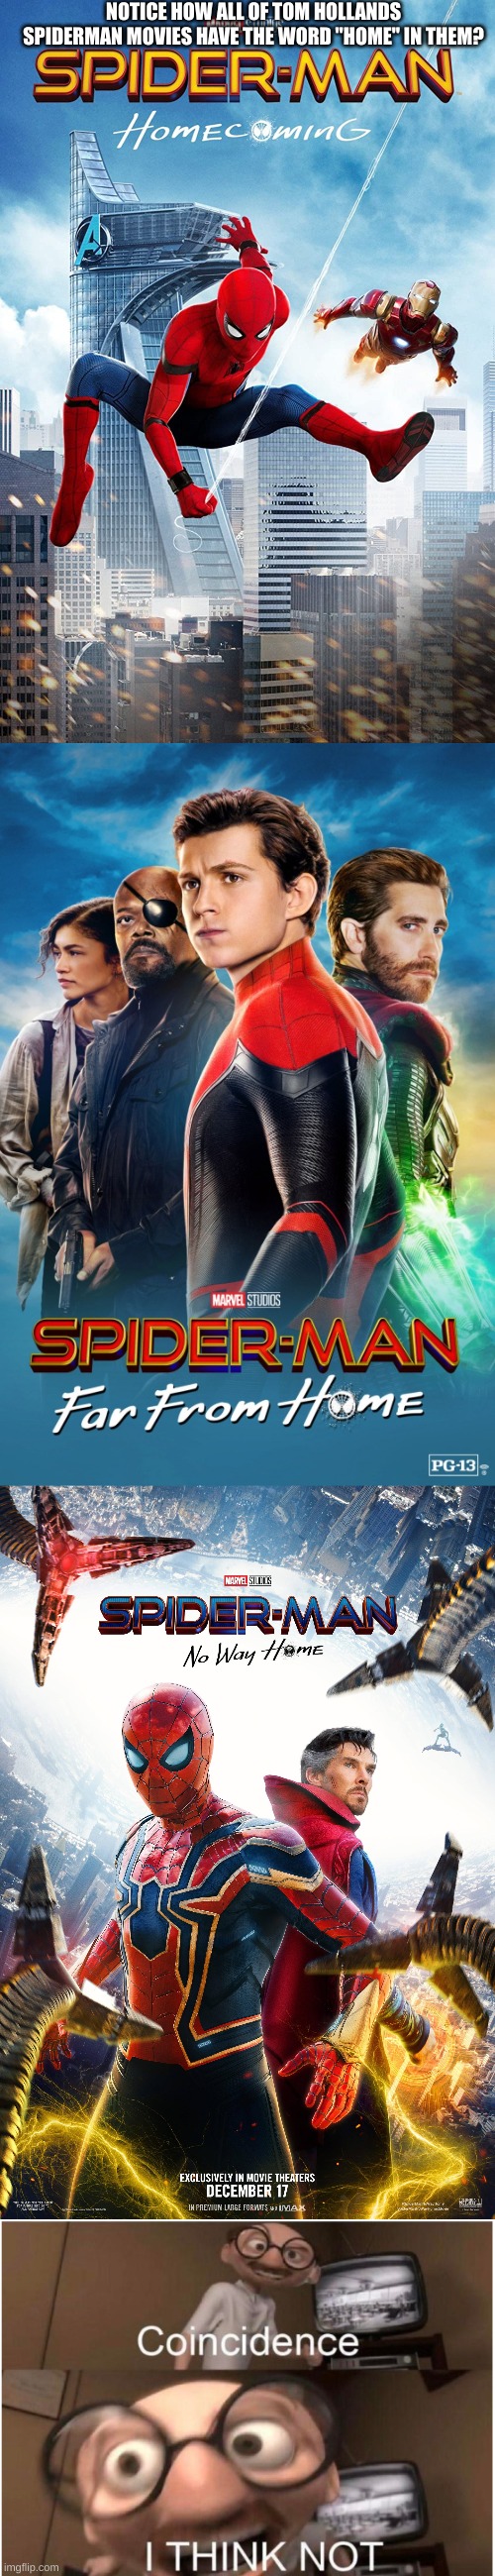 The new one is finally out!!!! | NOTICE HOW ALL OF TOM HOLLANDS SPIDERMAN MOVIES HAVE THE WORD "HOME" IN THEM? | image tagged in spiderman,tom holland,movies,spiderman homecoming,spiderman far from home,spiderman no way home | made w/ Imgflip meme maker